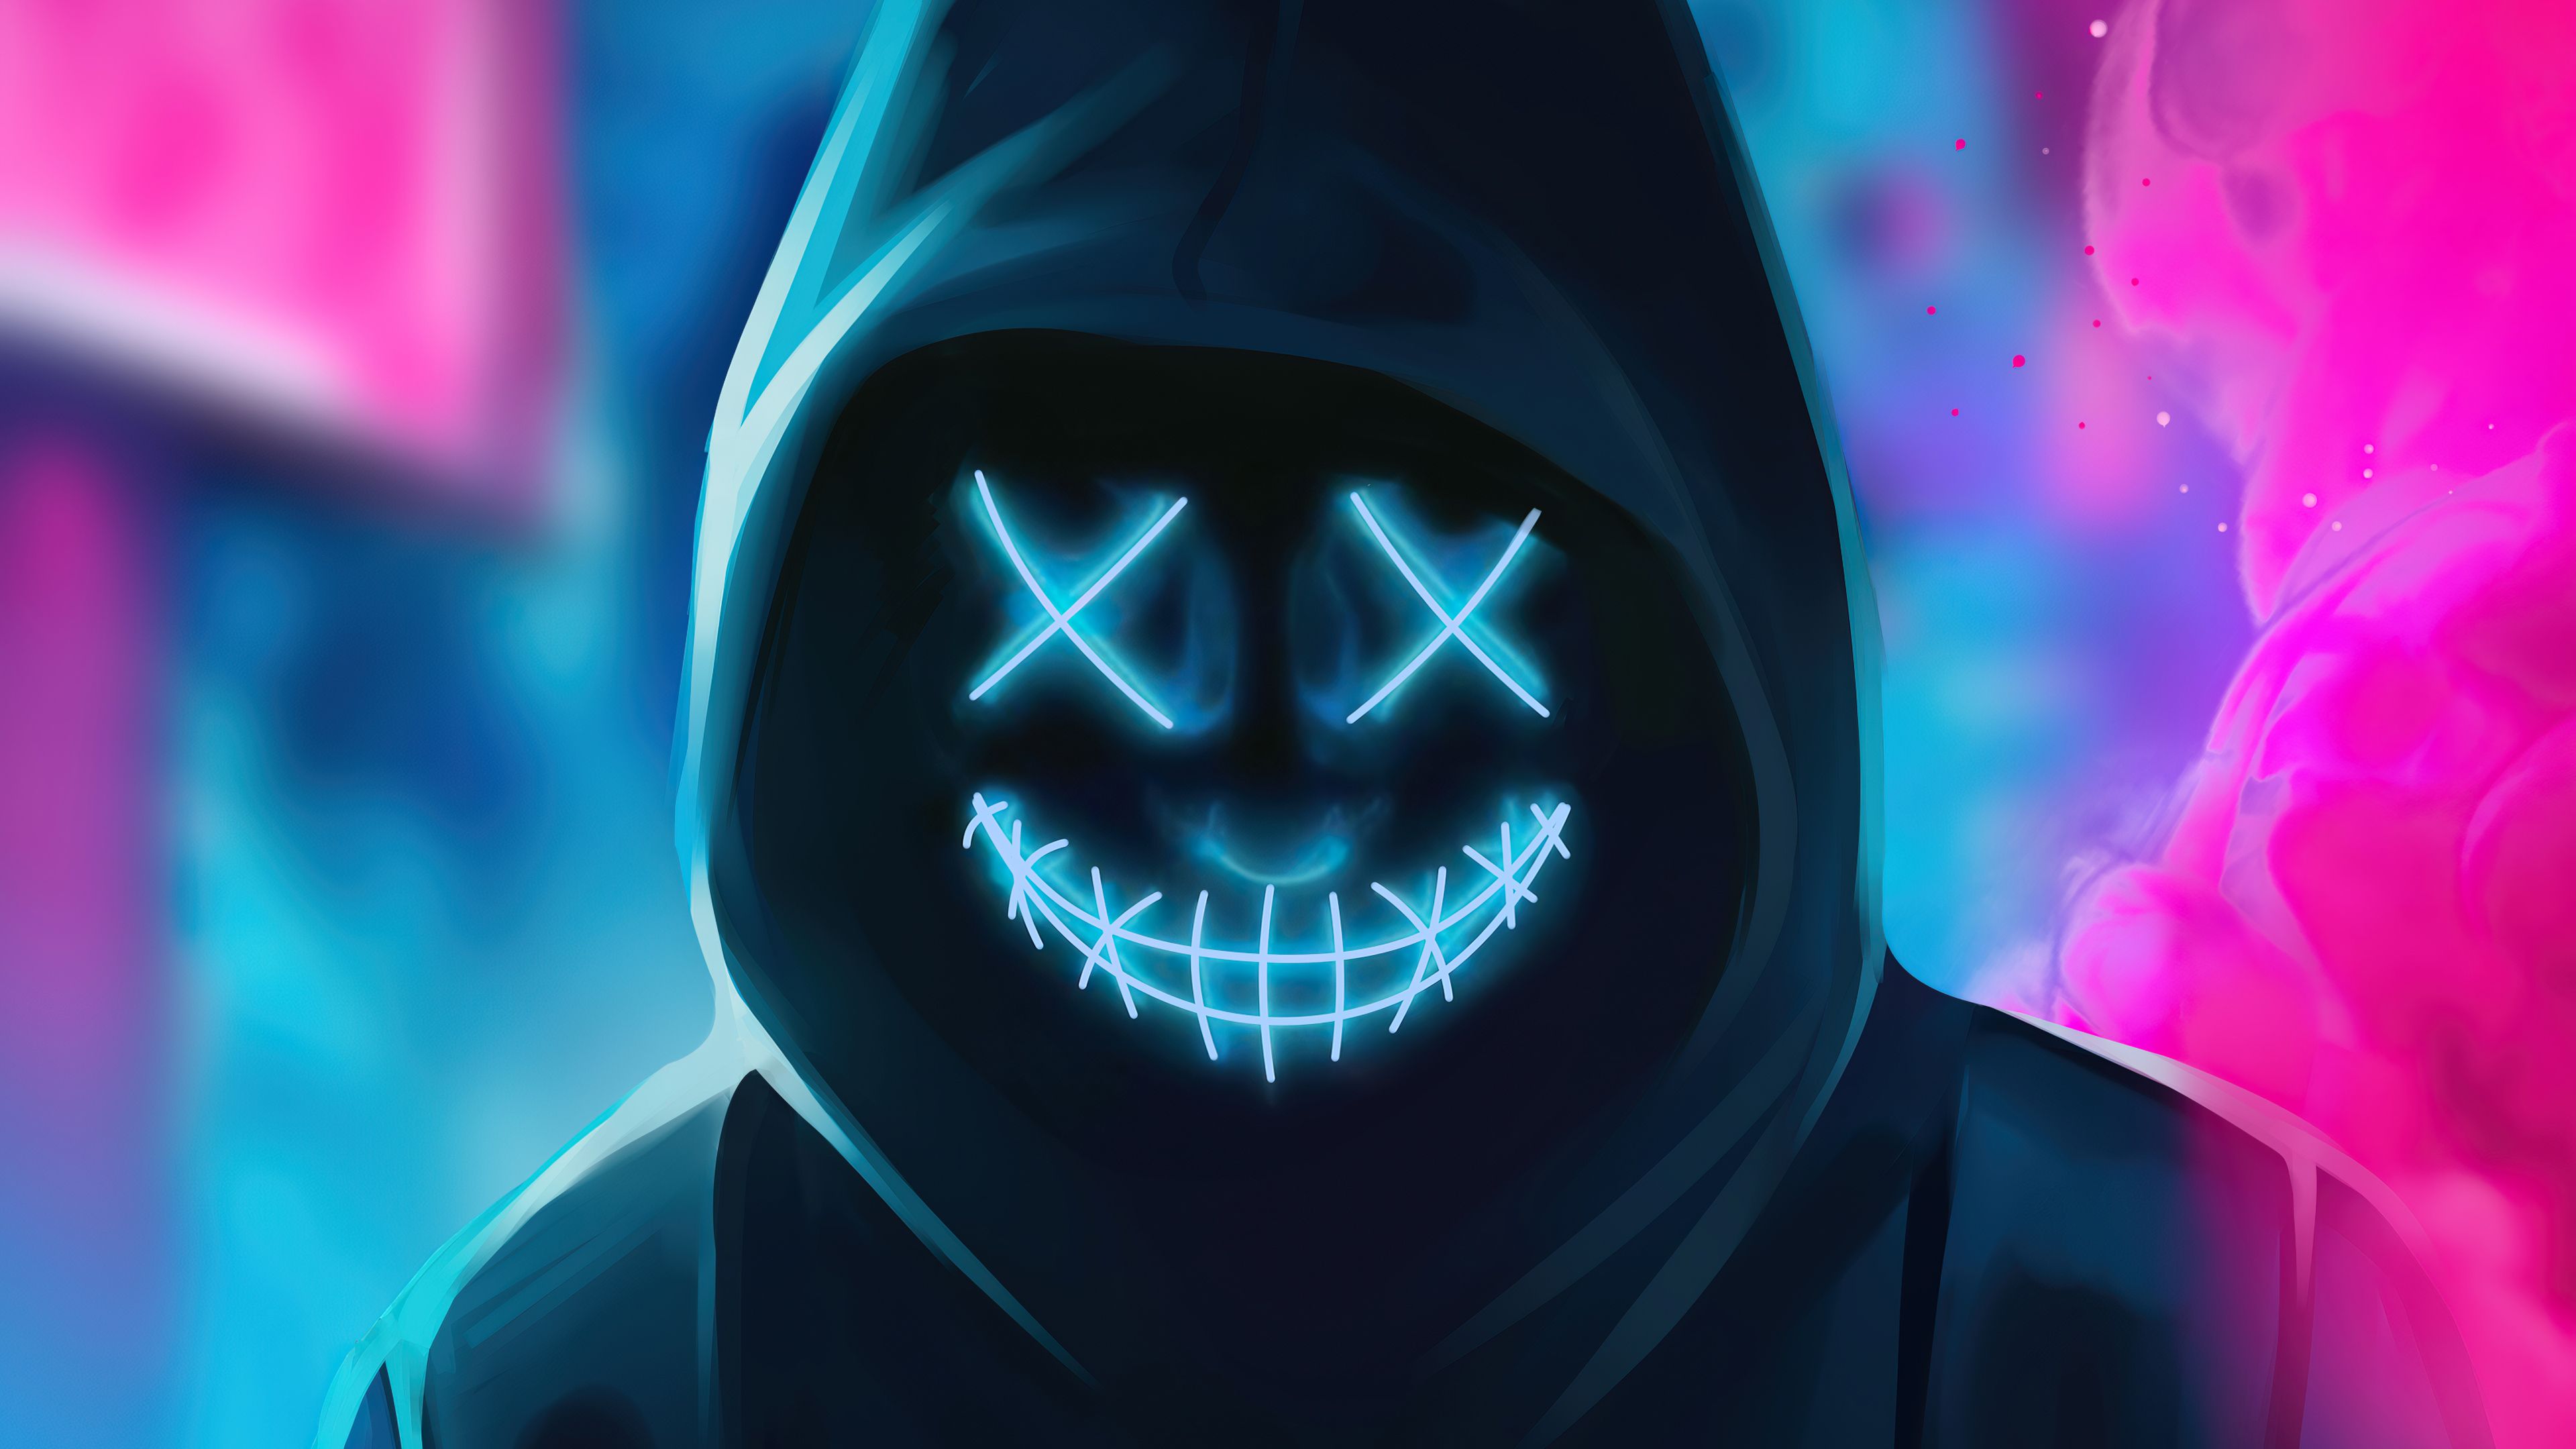 Neon Guy Mask Smiling 4k 1366x768 Resolution HD 4k Wallpaper, Image, Background, Photo and Picture